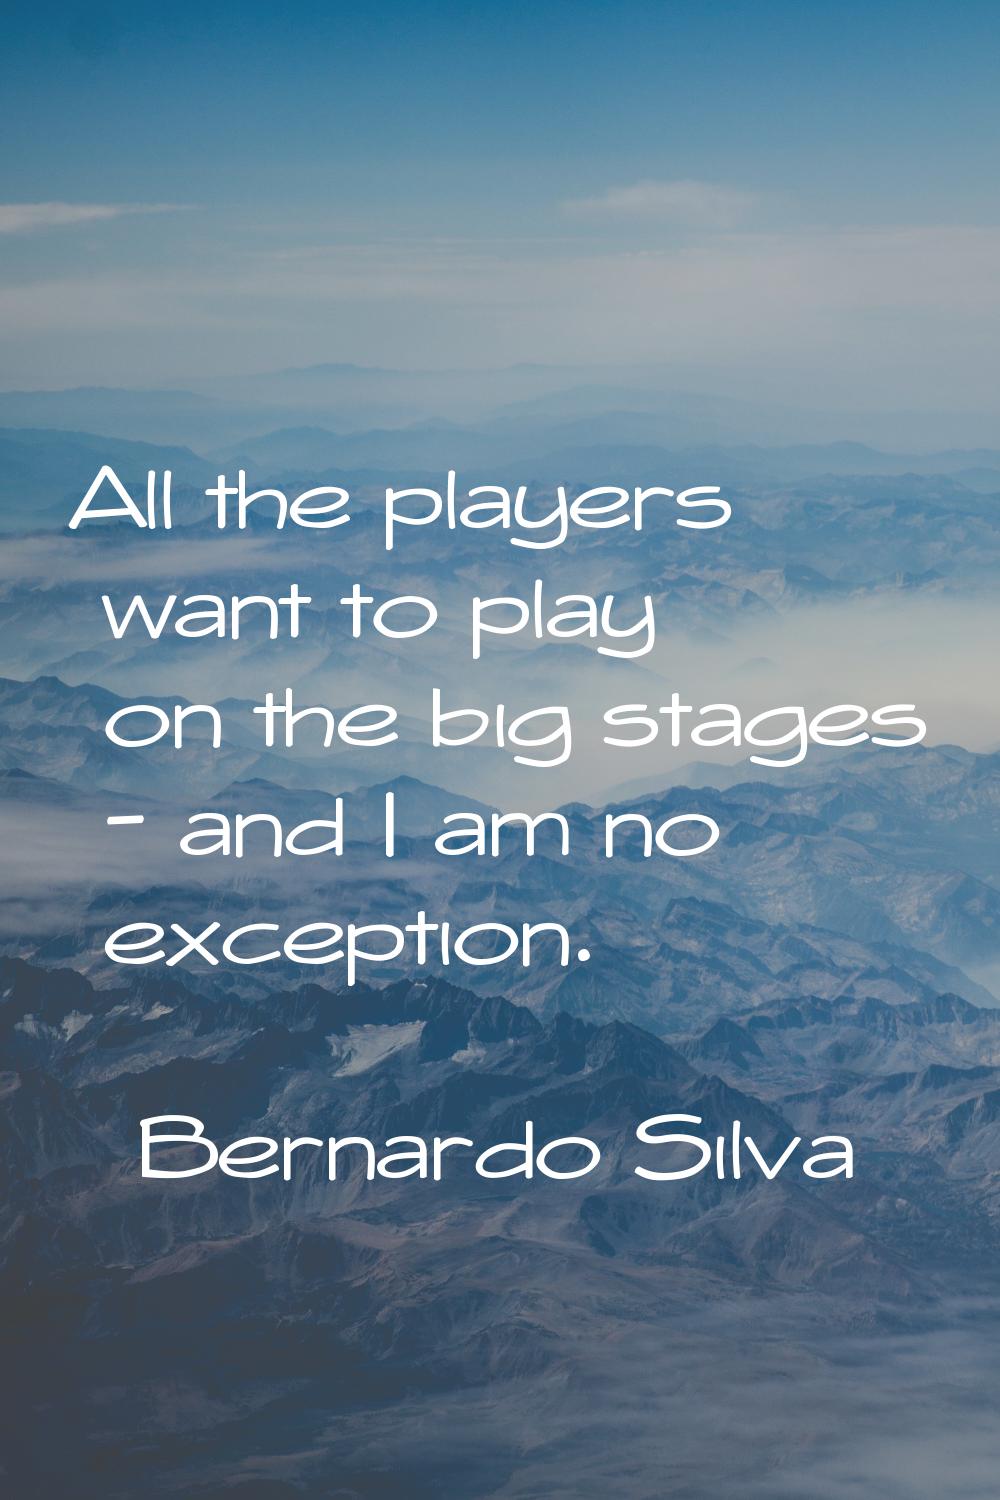 All the players want to play on the big stages - and I am no exception.